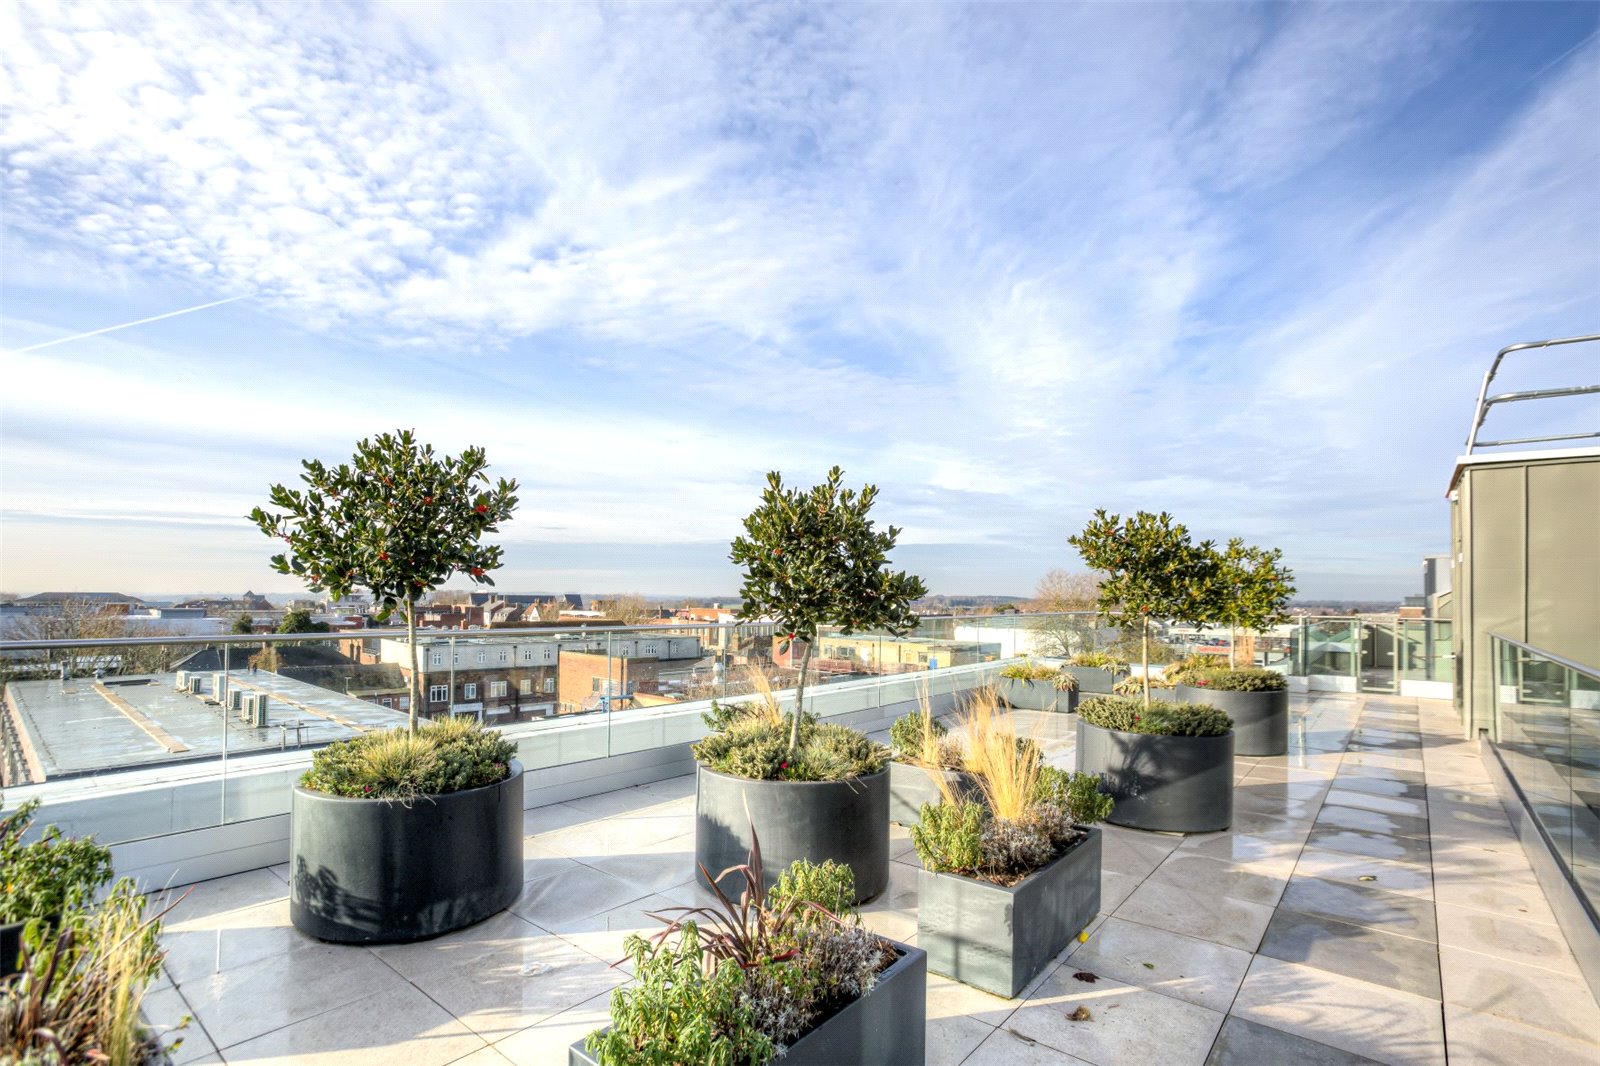 Ingrave House Roof Terrace